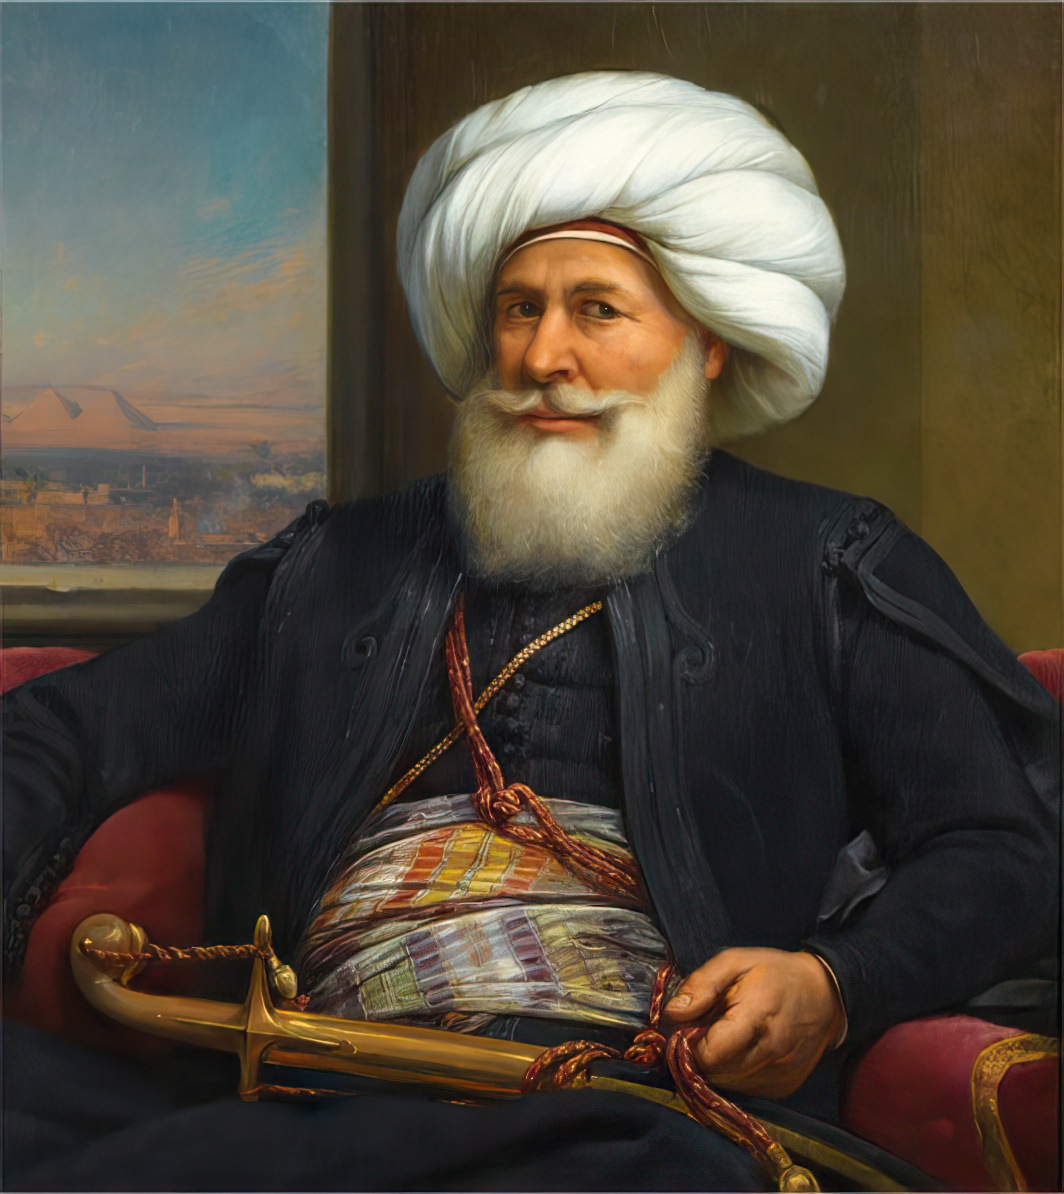 Muhammad Ali by Auguste Couder, 1840